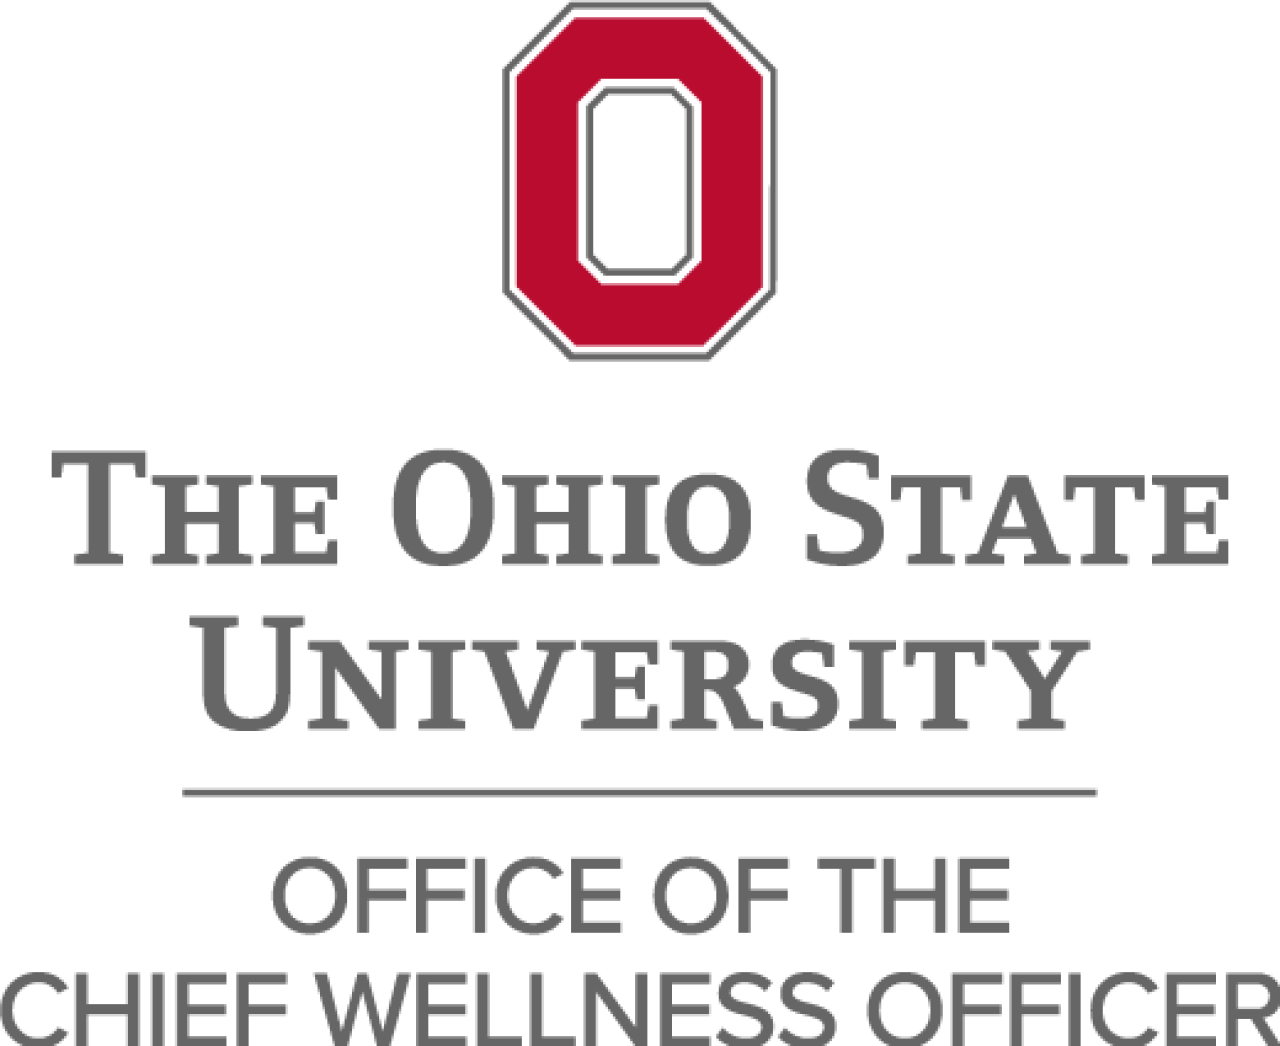 Office of The Chief Wellness Officer logo